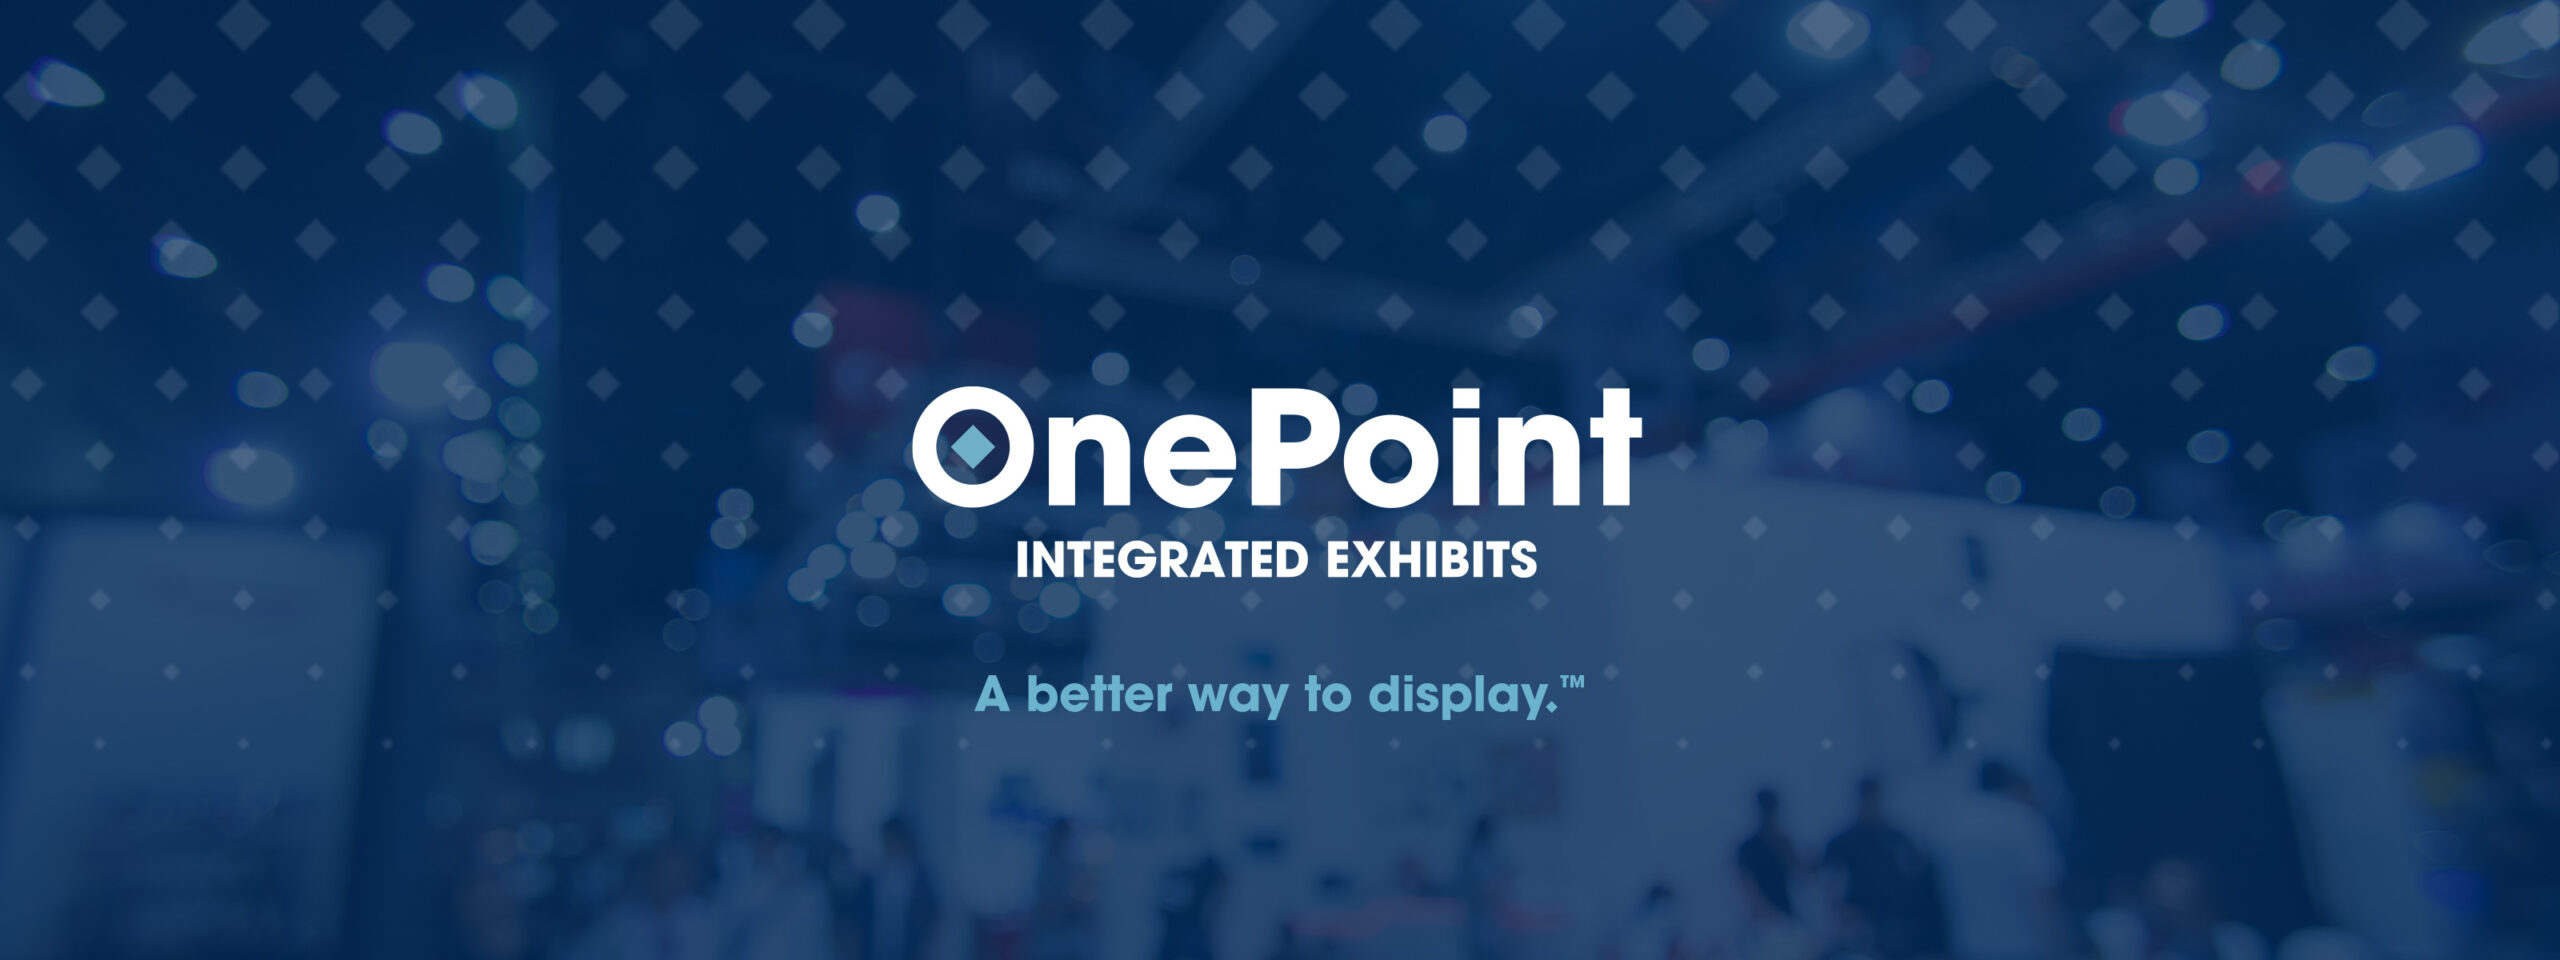 OnePoint logo over a blurry blue background